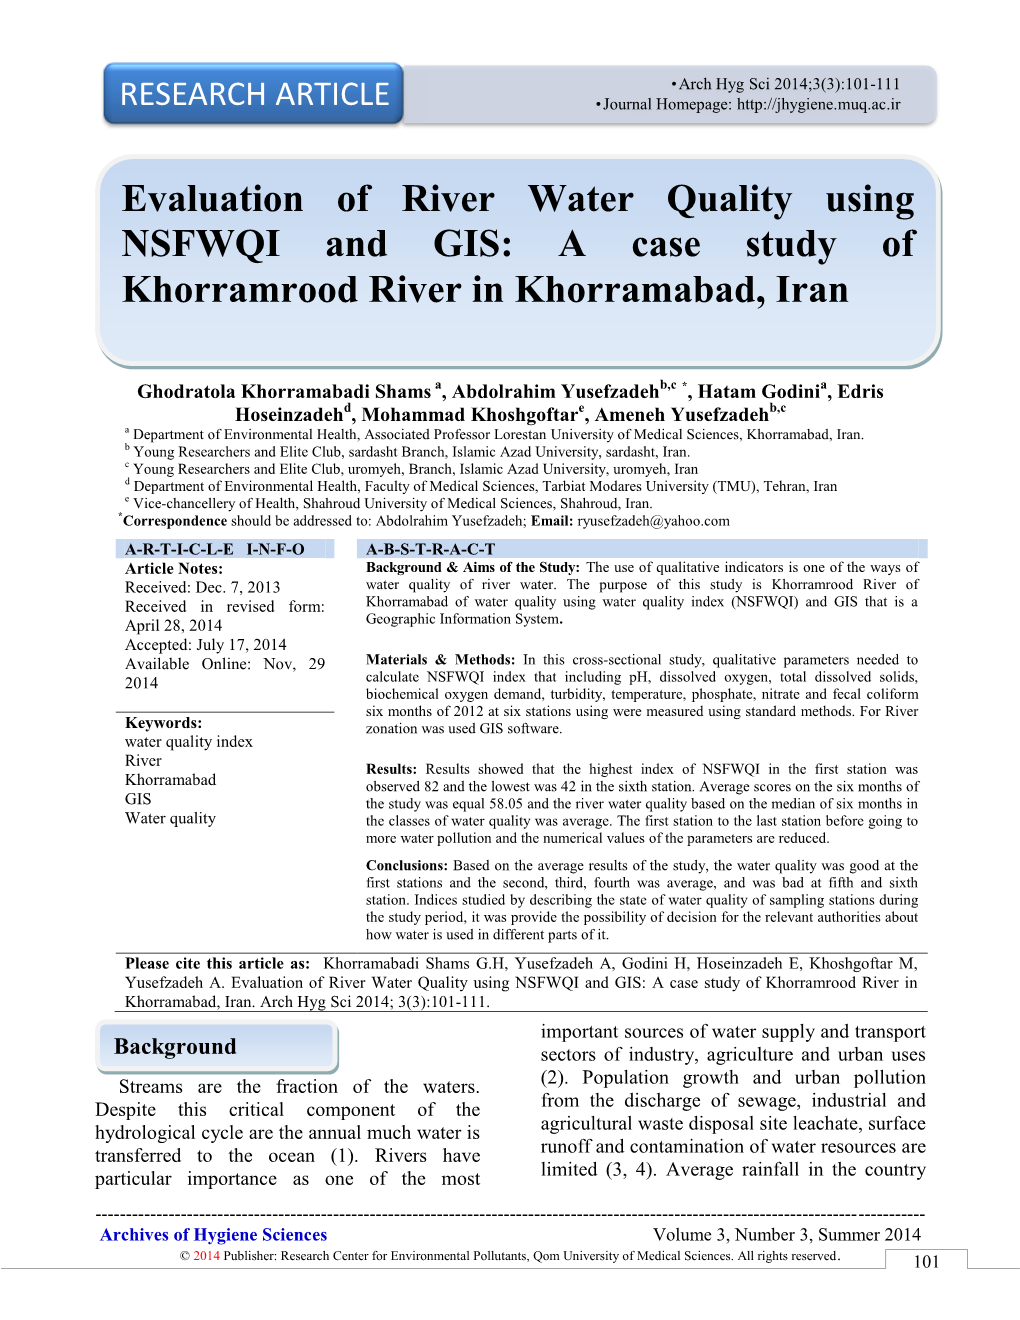 Evaluation of River Water Quality Using NSFWQI and GIS: a Case Study Of